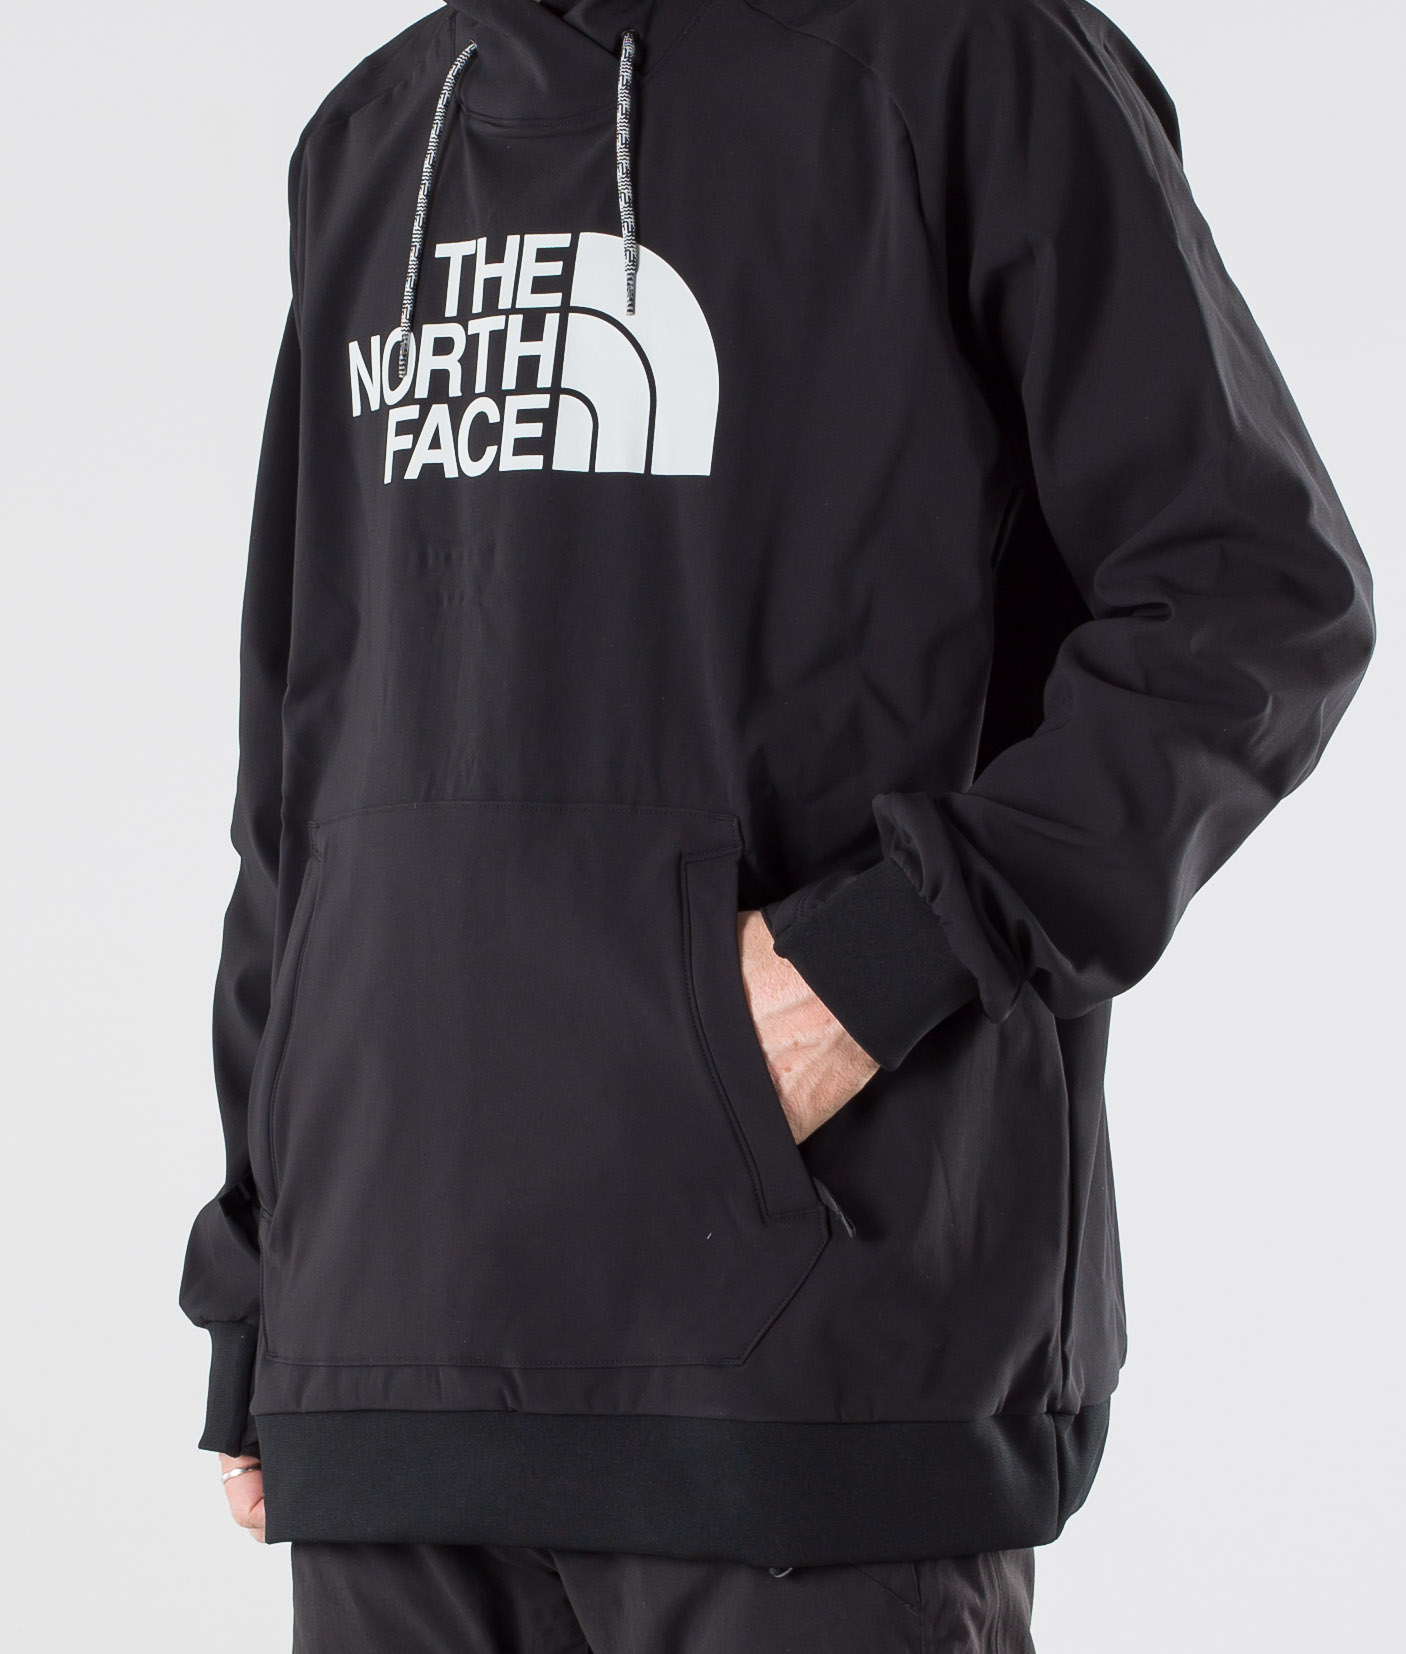 tekno hoodie north face